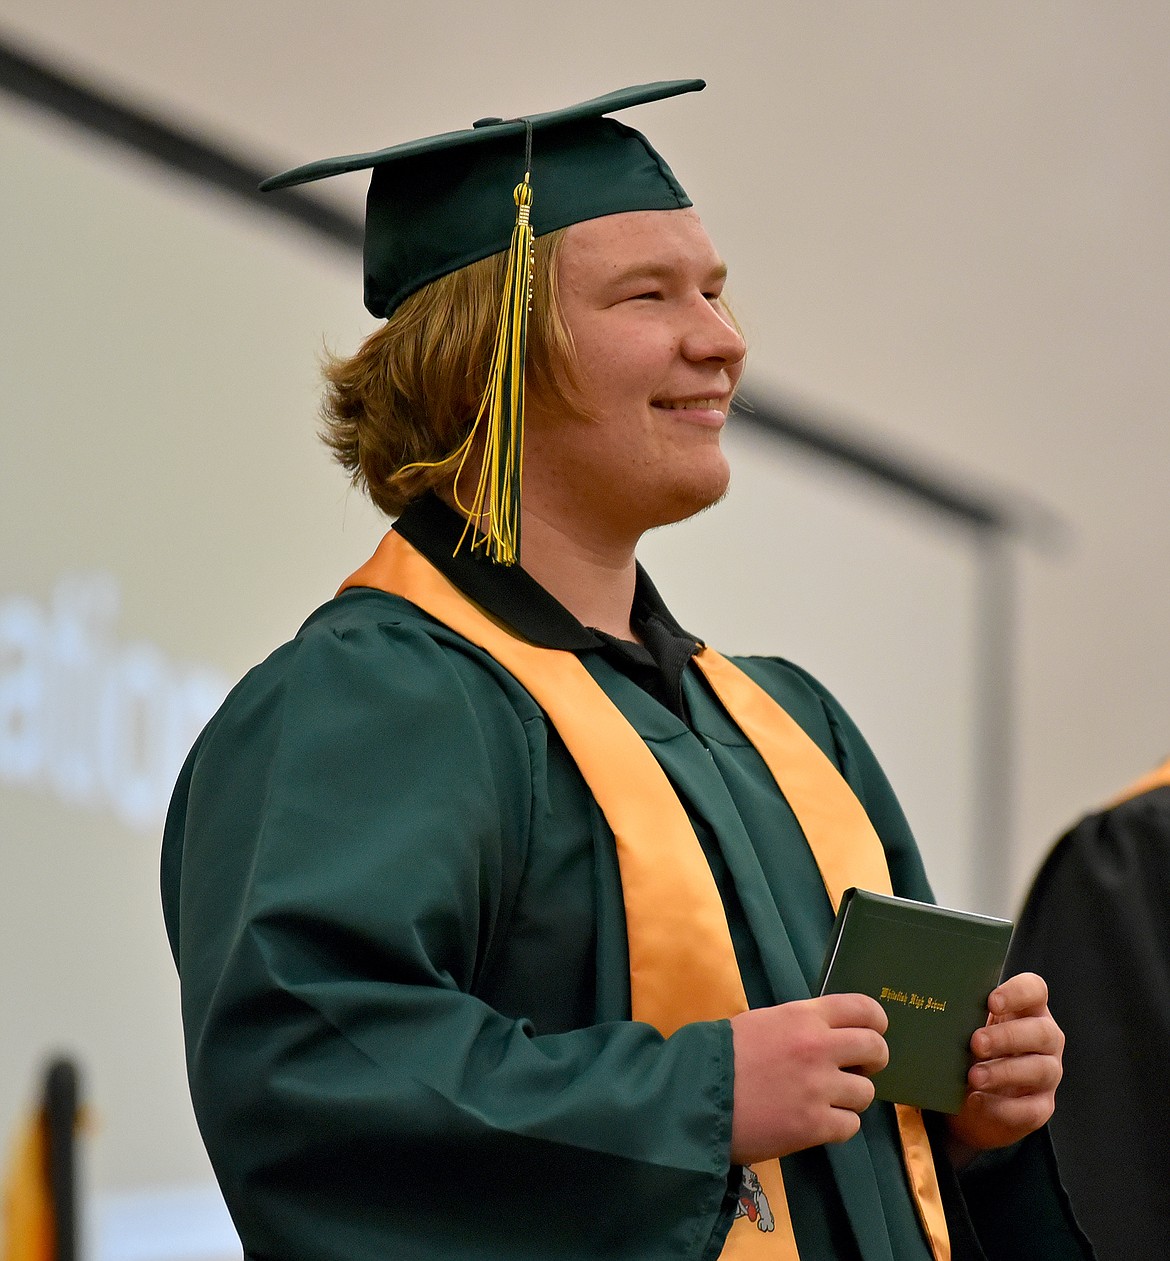 Ashton Akey graduates with the Whitefish High School Class of 2022 Saturday during a commencement ceremony at the high school gym. (Whitney England/Whitefish Pilot)